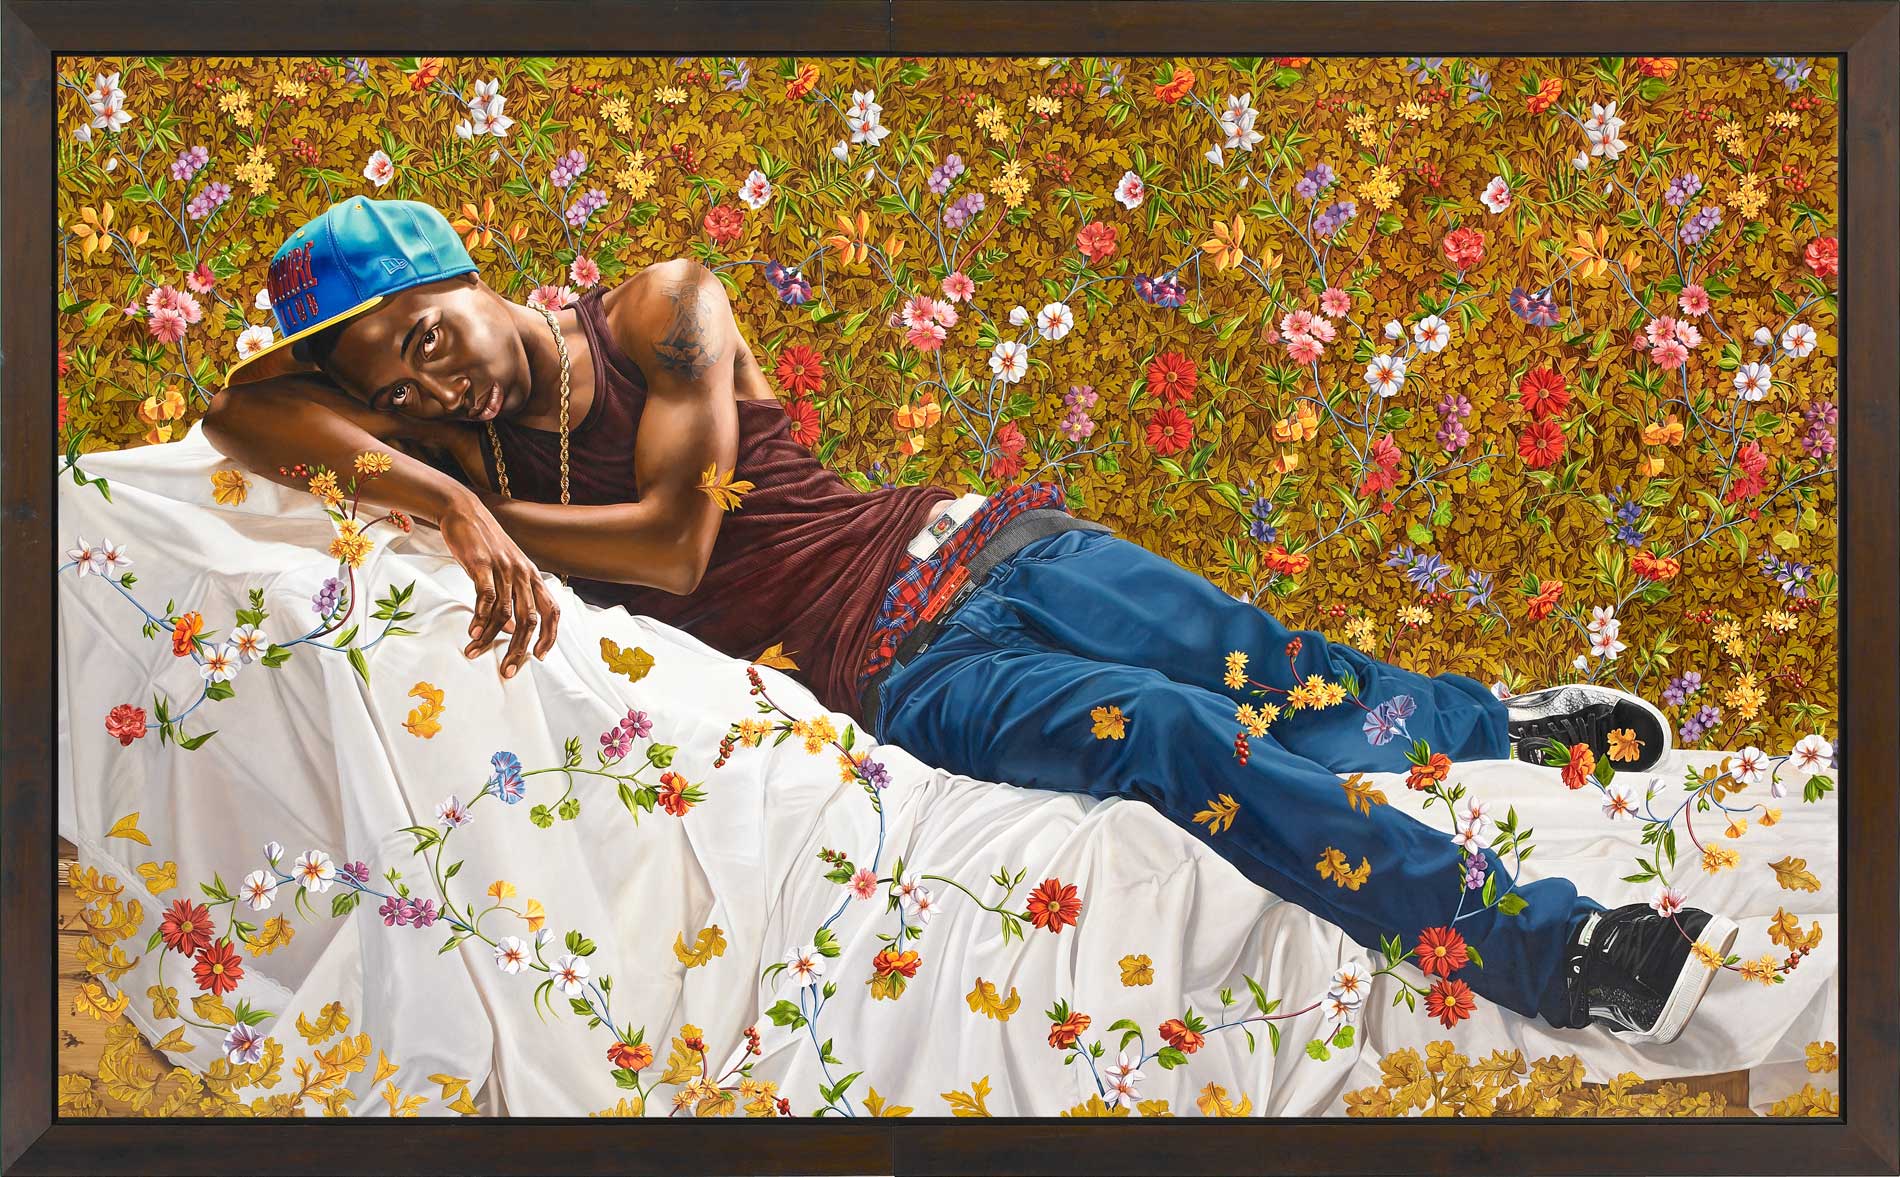 Kehinde Wiley | Down | Morpheus, 2008 Oil on Canvas. | 6